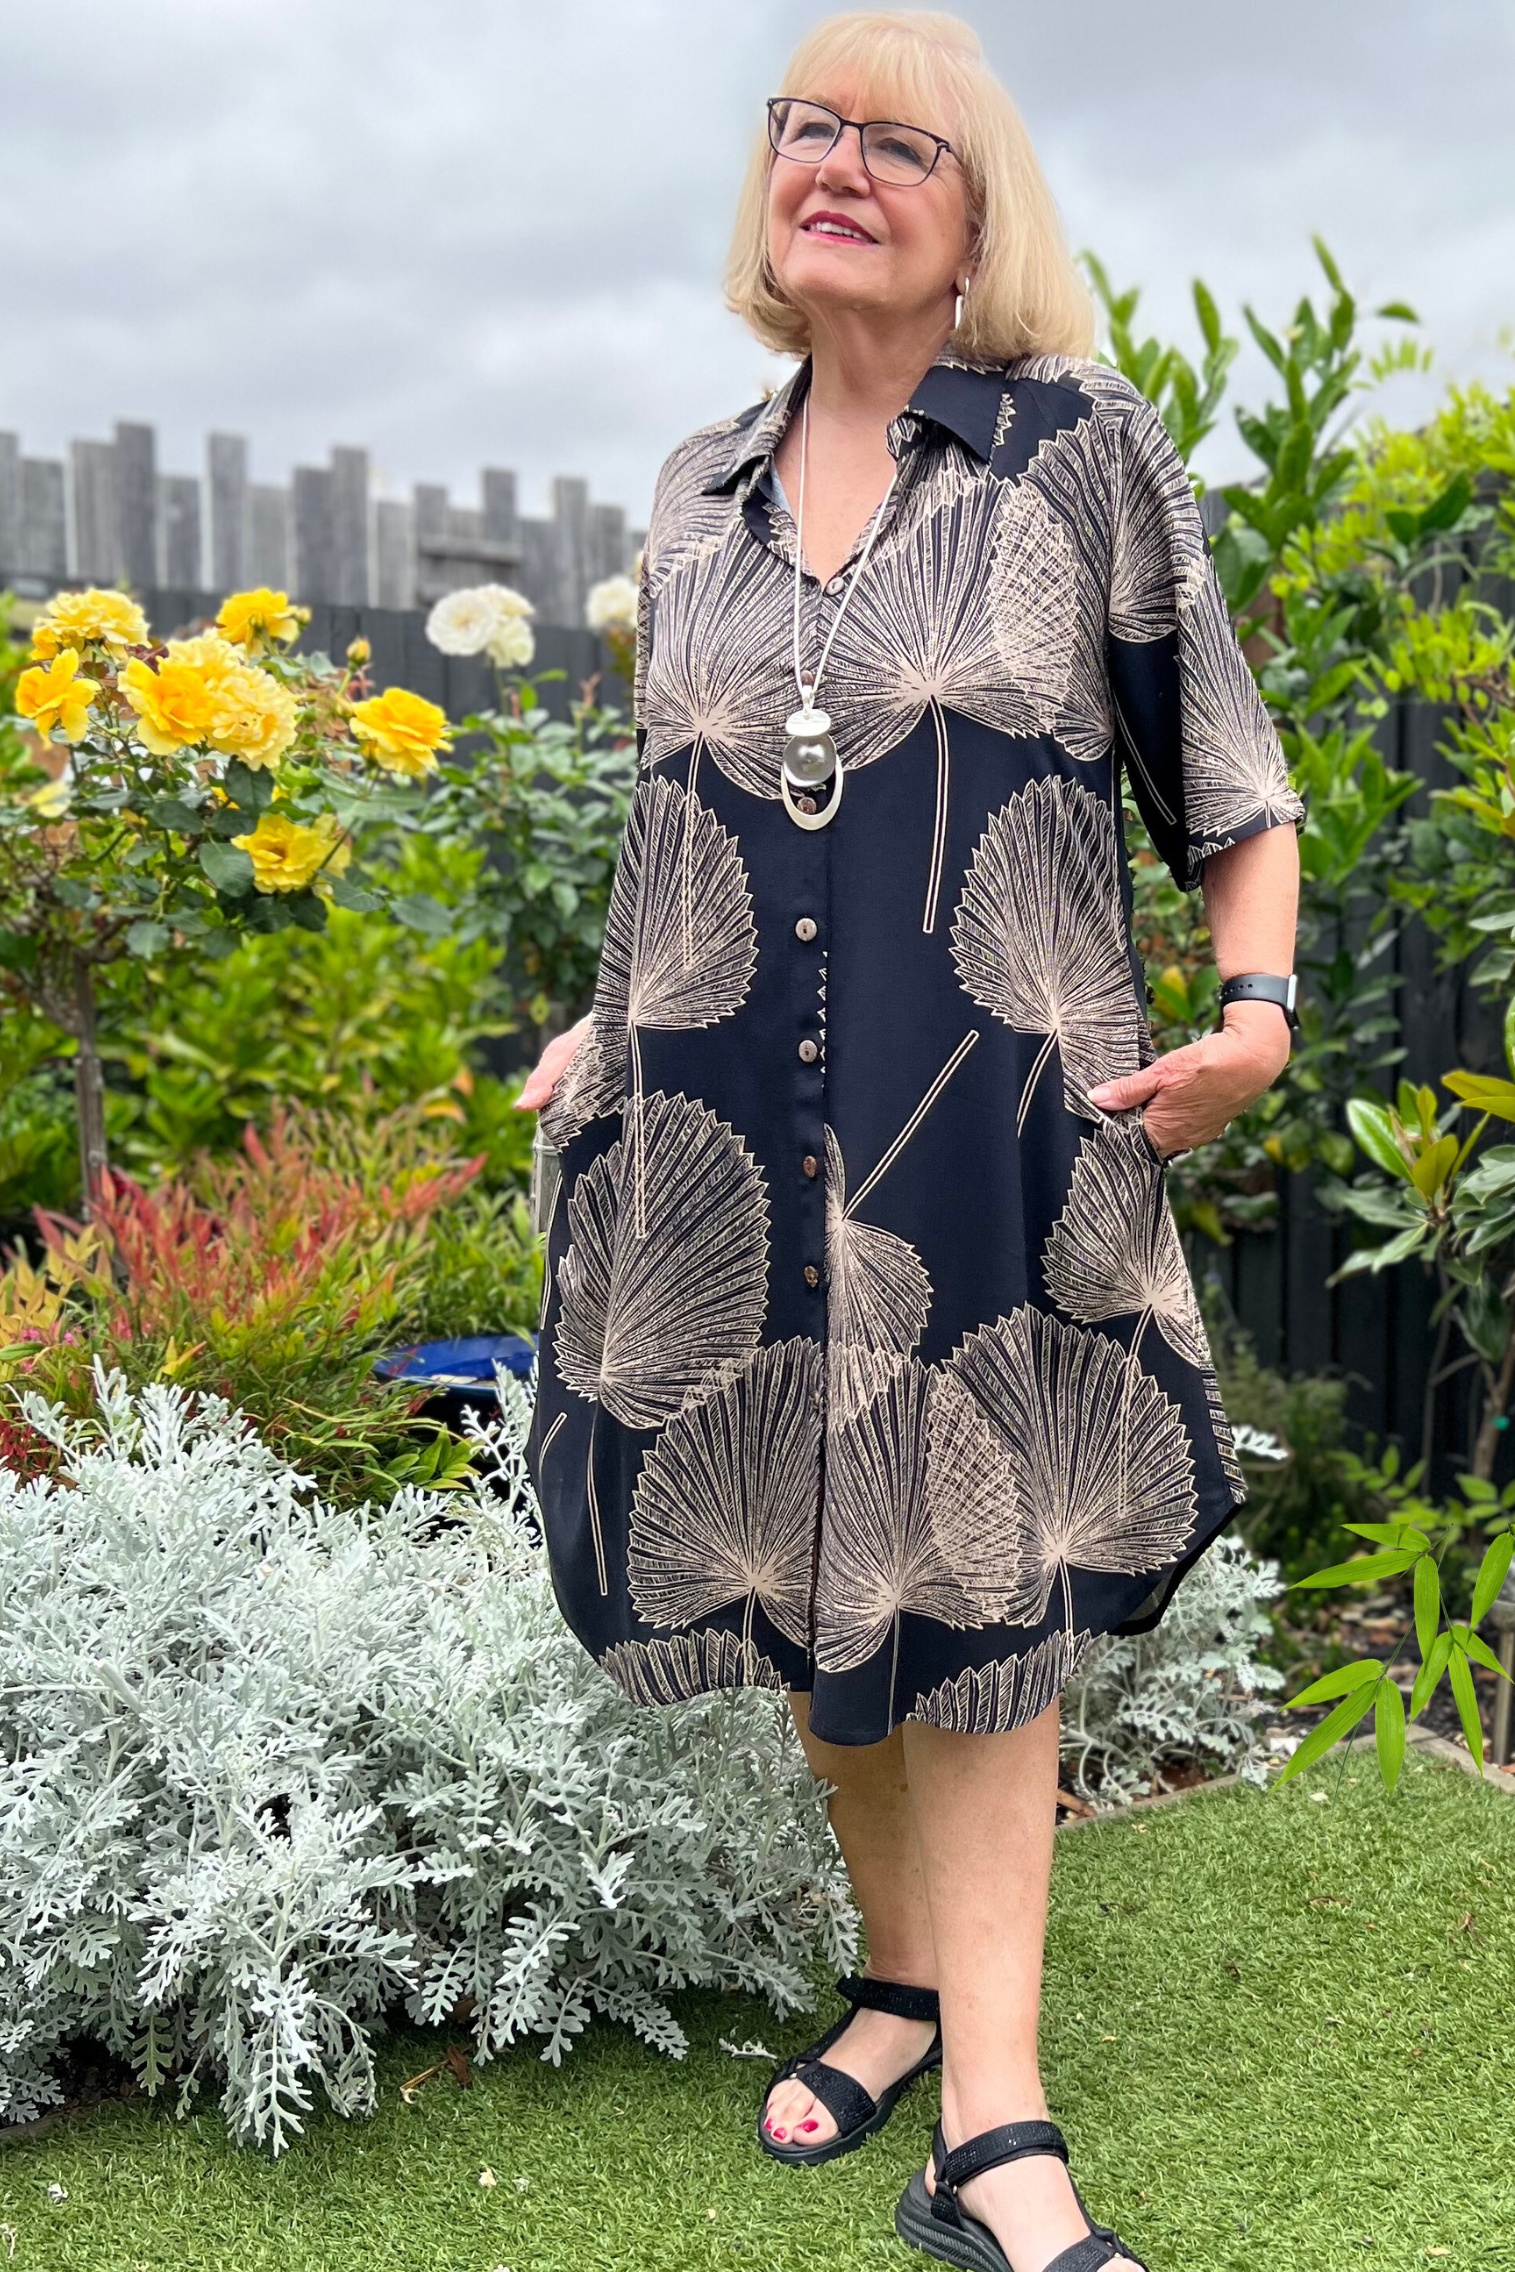 kita ku model in the shirt style dress pronto in a paolo print of fan black and mocha palm leaf set in a sunny garden.